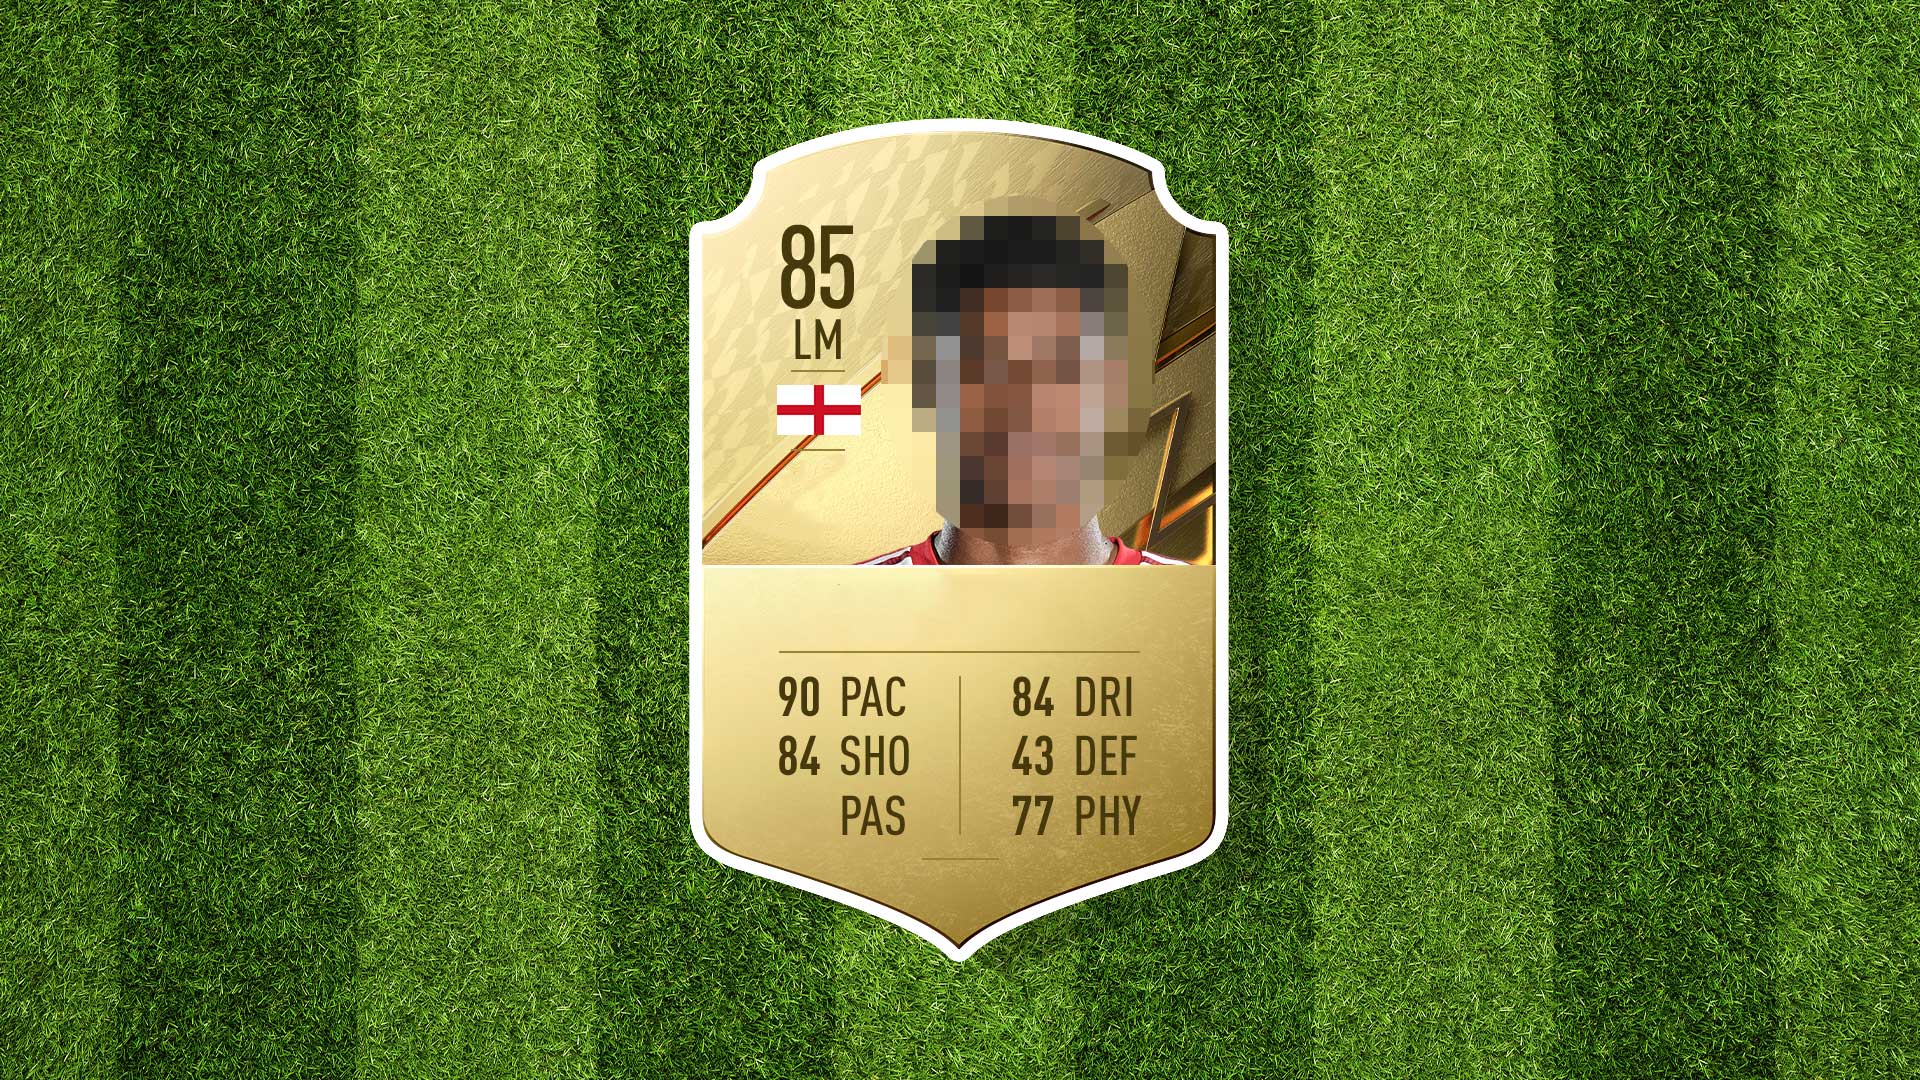 A blurred FIFA 22 player